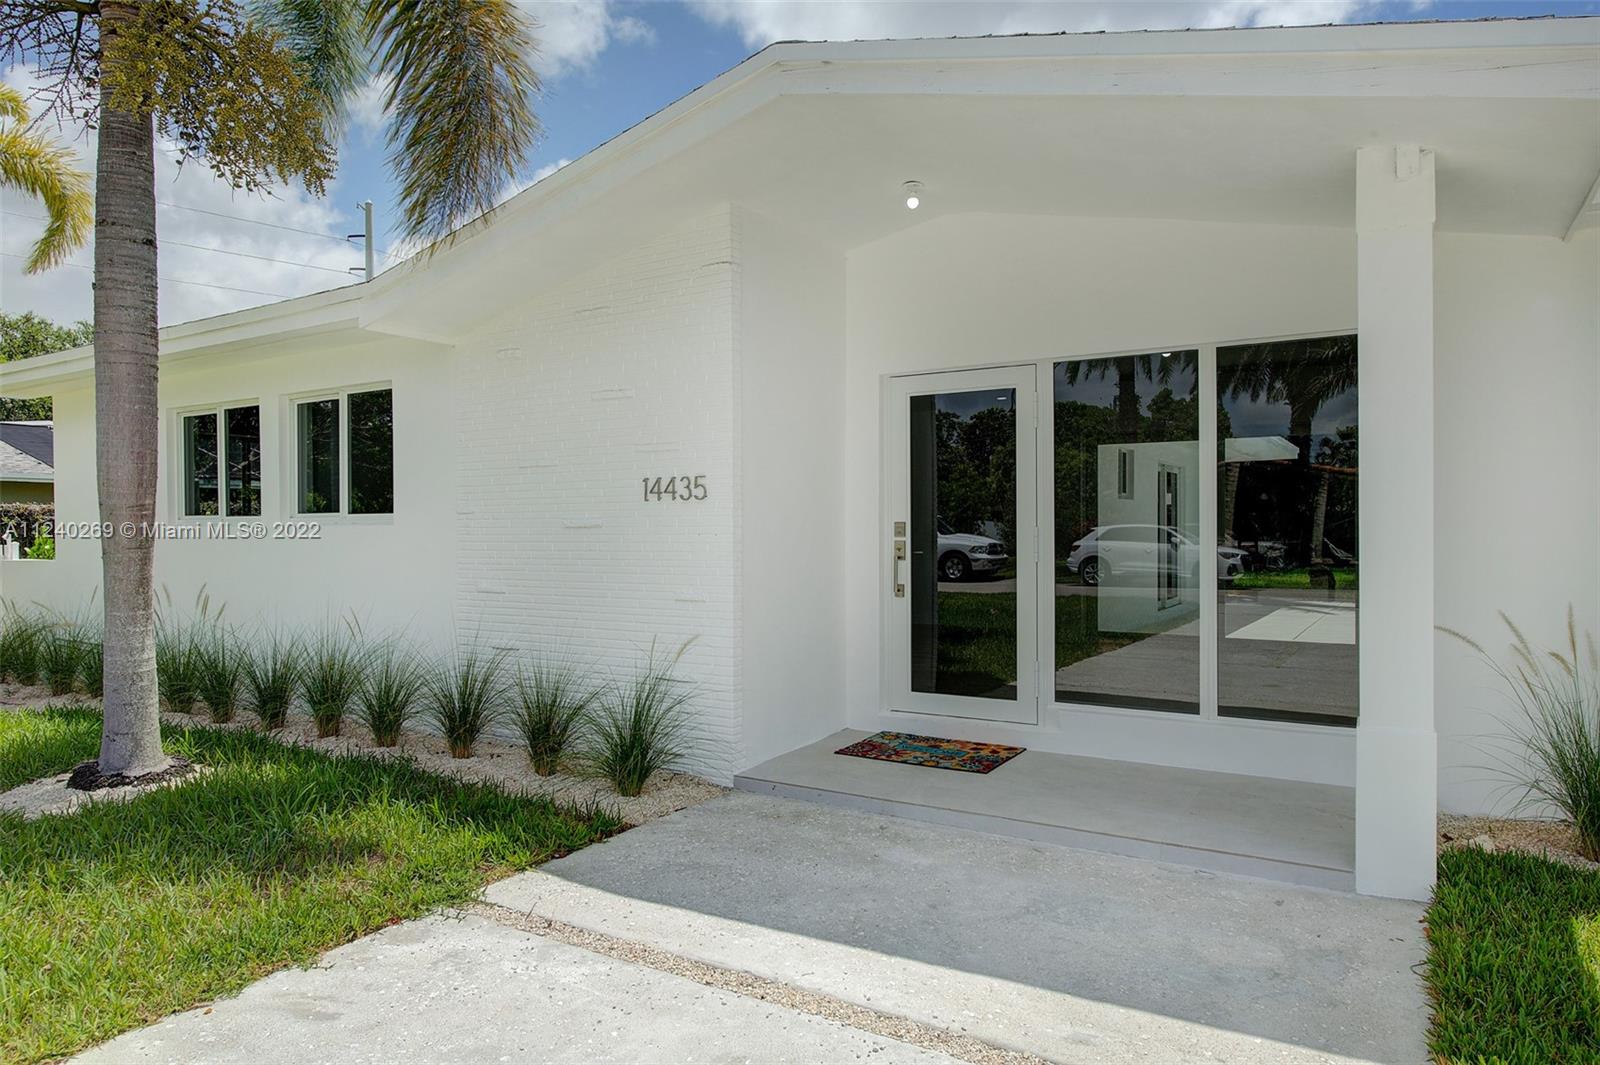 This one-story home in one of Miami’s most desirable neighborhoods, 5/3 with 2790 total sq ft on 16,815 sq ft lot. This home is a 2022 renovation w/ an open plan living space, a modern designed eat-in kitchen w/ quartz countertops, all new S/S appliances, new bathrooms, impact doors & windows, all new electrical,  all new plumbing, new porcelain floors throughout & large pool, just to name just a few. Featuring a very private master in-suite overlooking the beautiful pool & deck. The backyard is spectacular, open & surrounded by coconut palms where you can relax in your private oasis & have plenty of space to entertain. Private fencing along the property w/ lush landscaping for privacy. Ideally located in the quiet neighborhood of The Falls, not far from shopping, restaurants & A+ schools